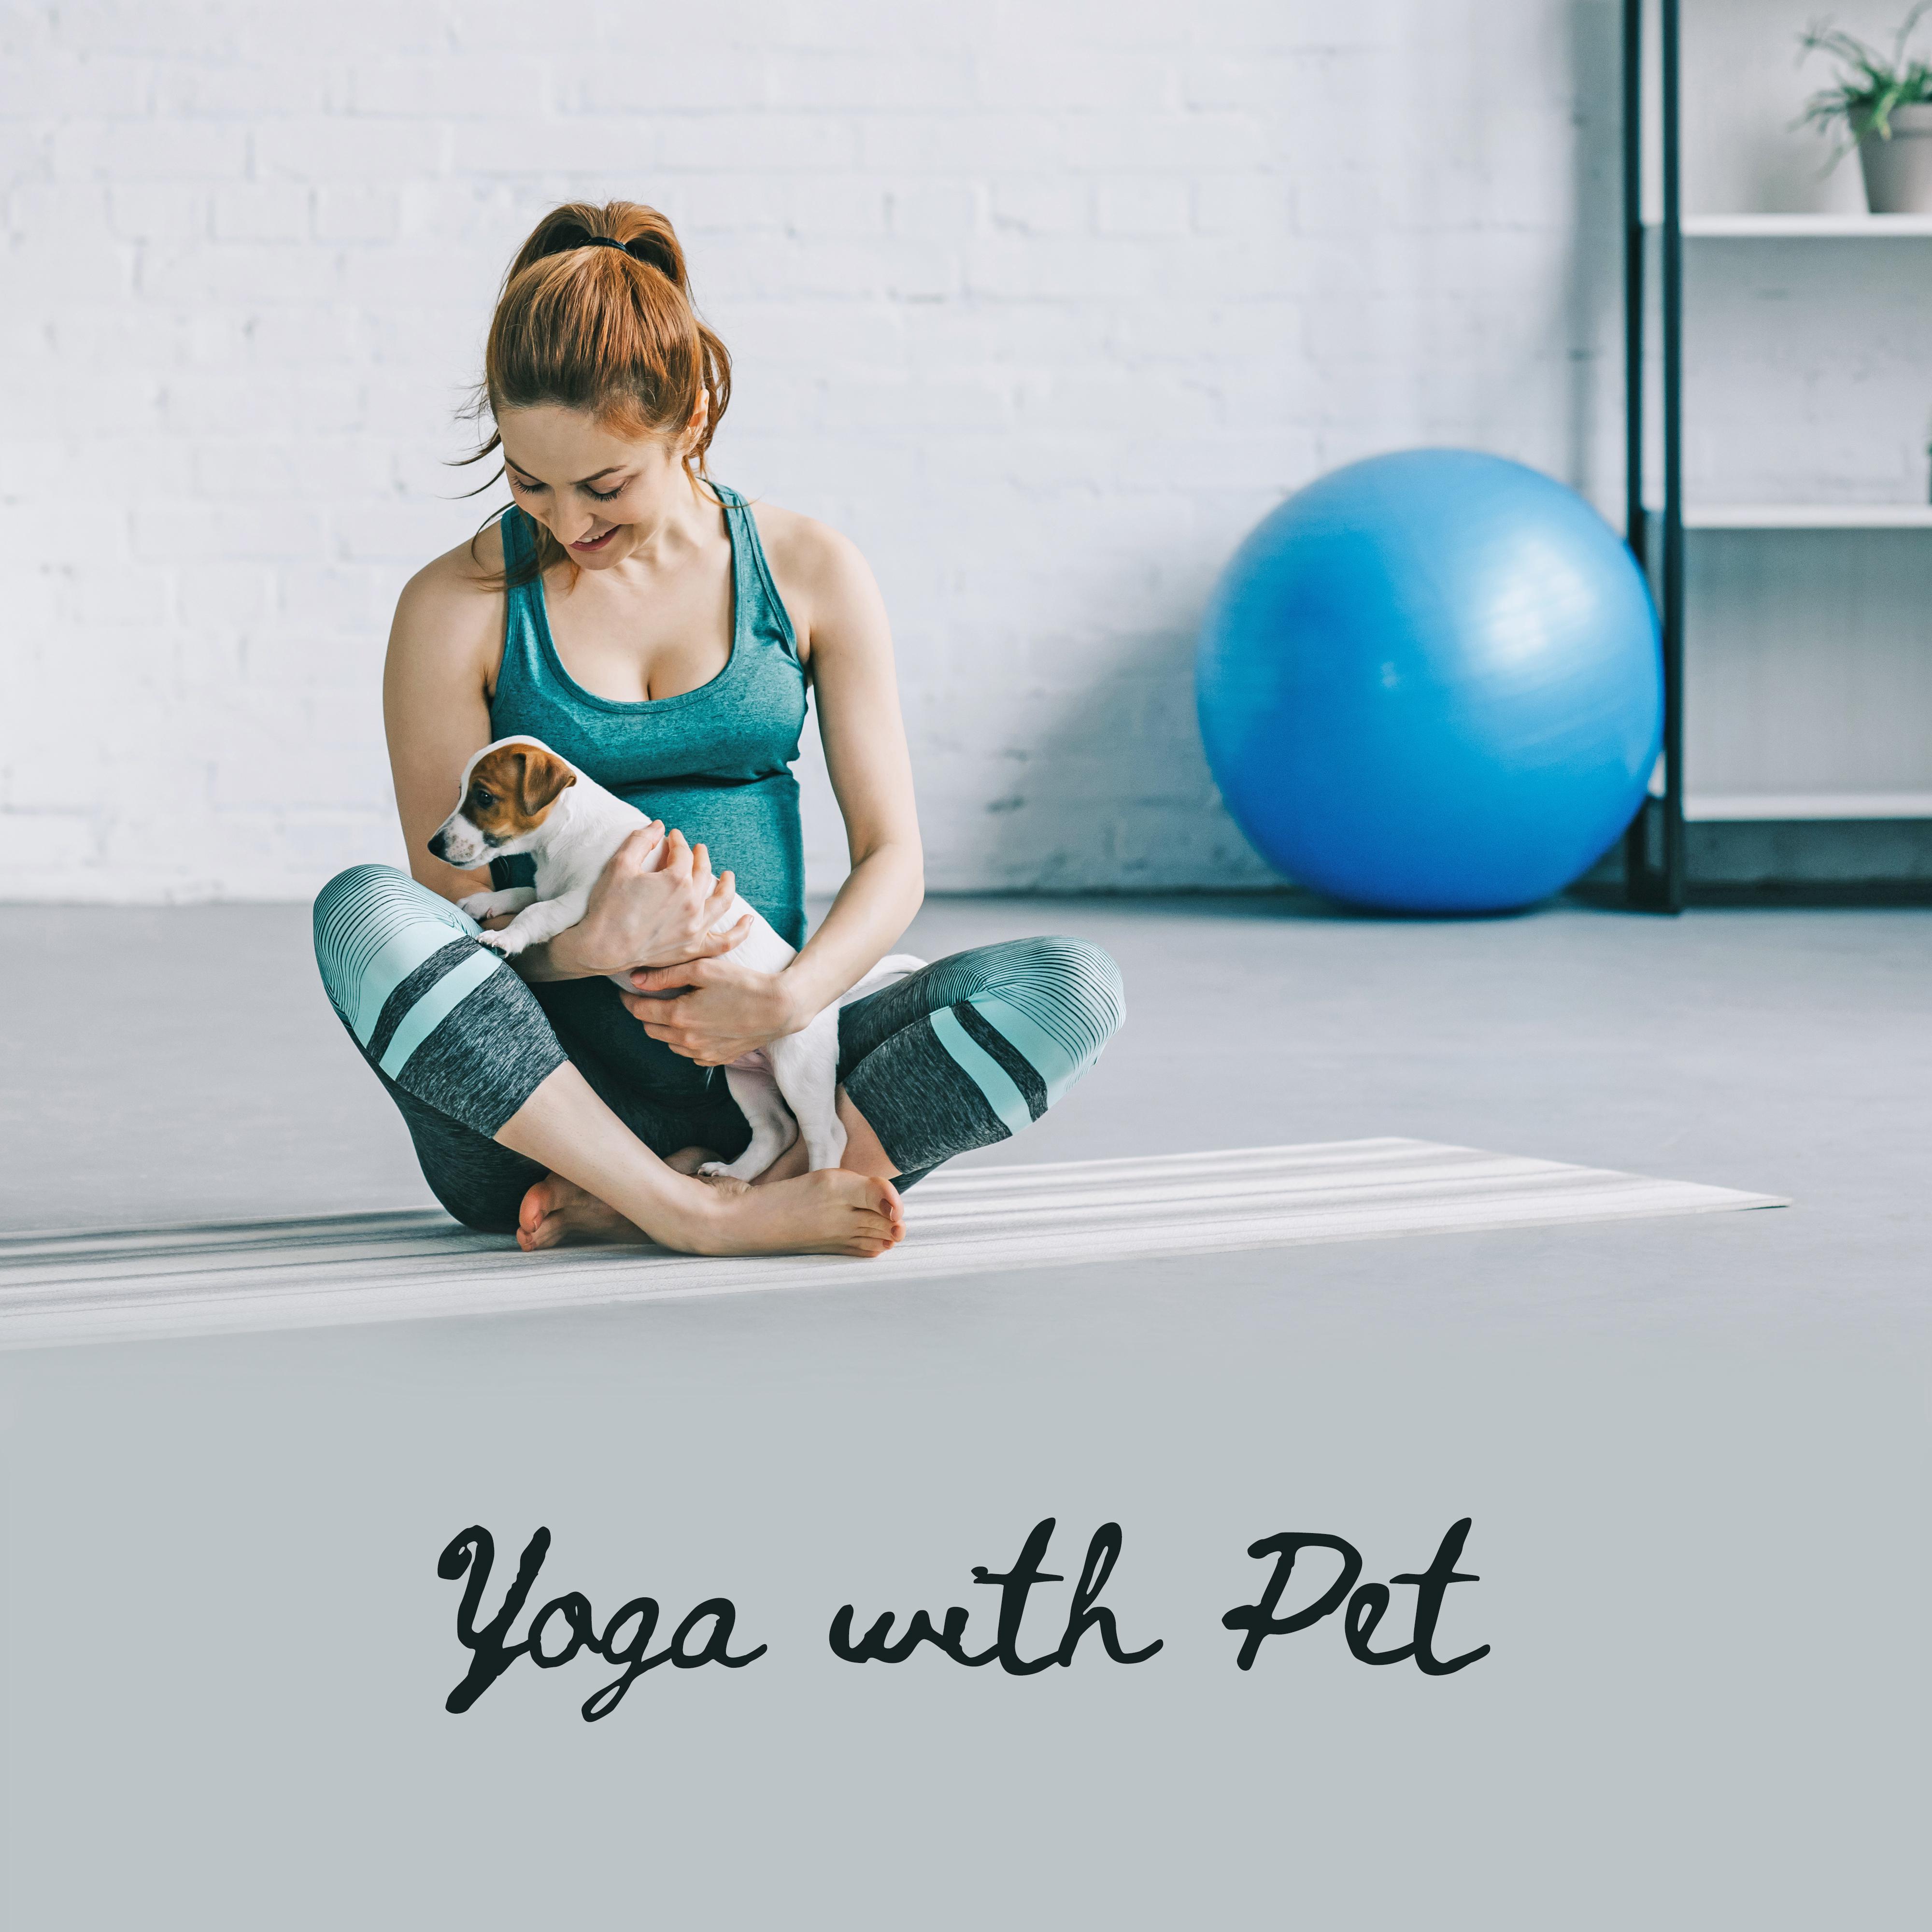 Yoga with Pet